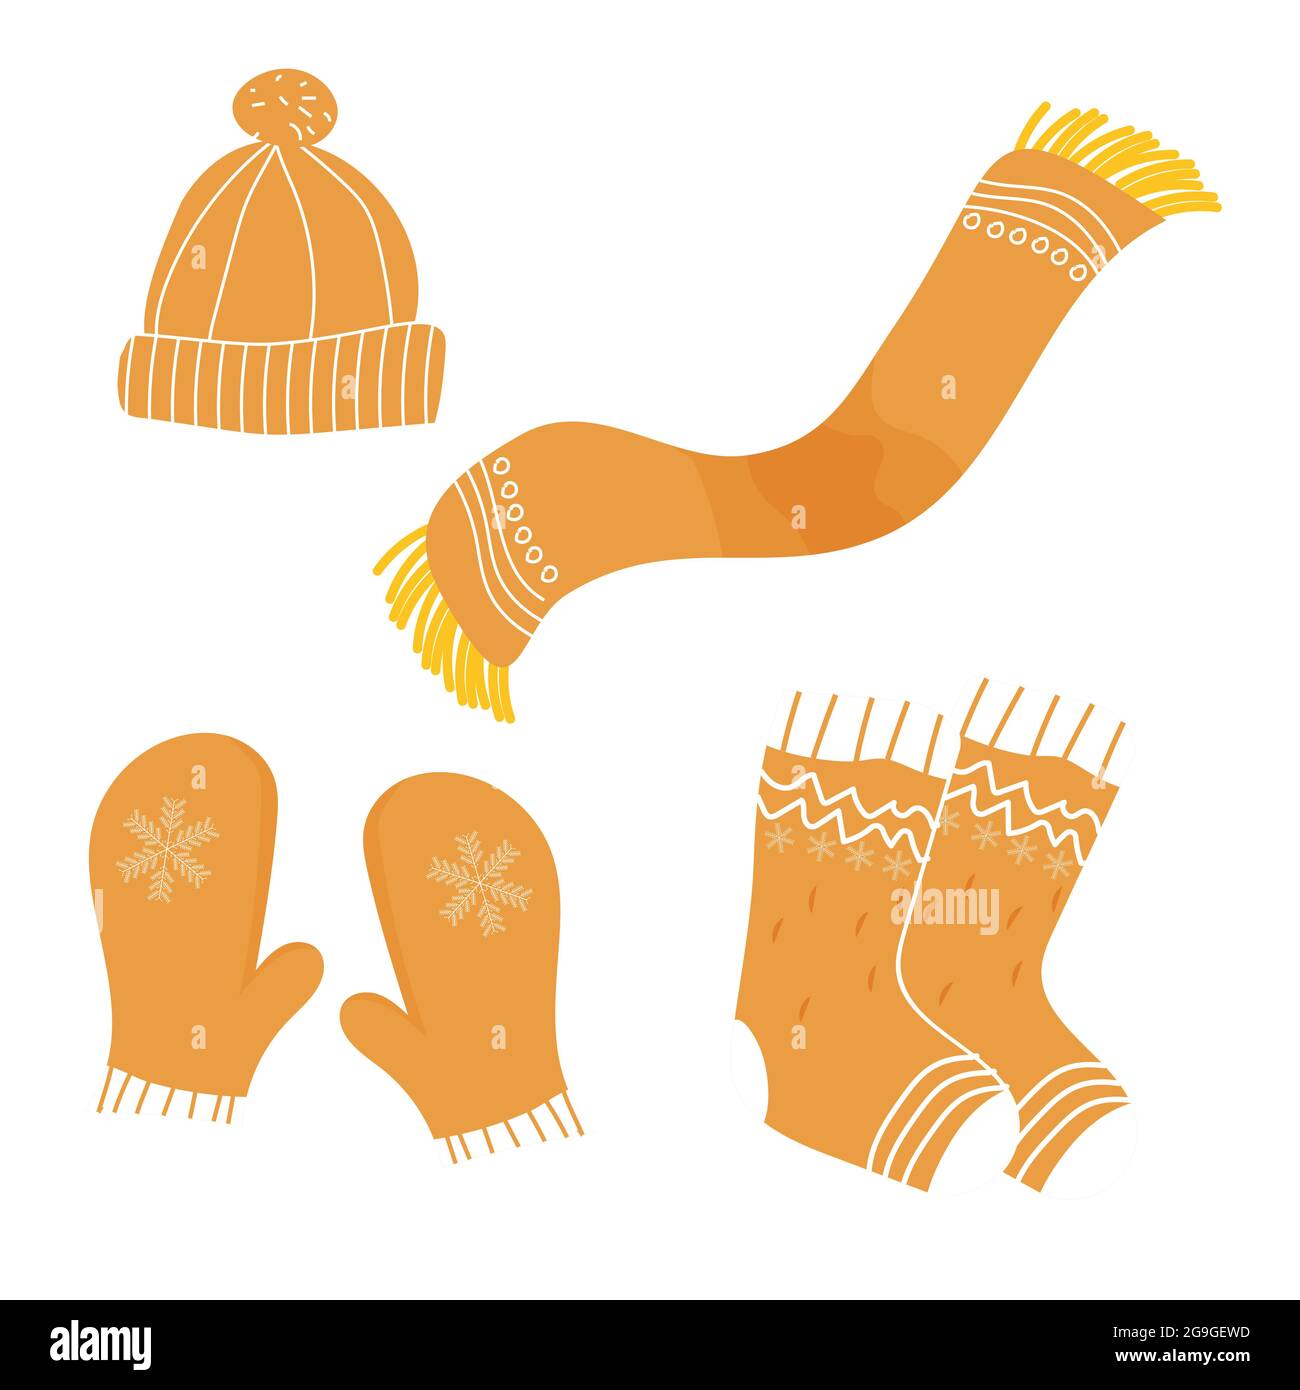 Wearing hat, gloves and scarf Stock Vector Images - Alamy